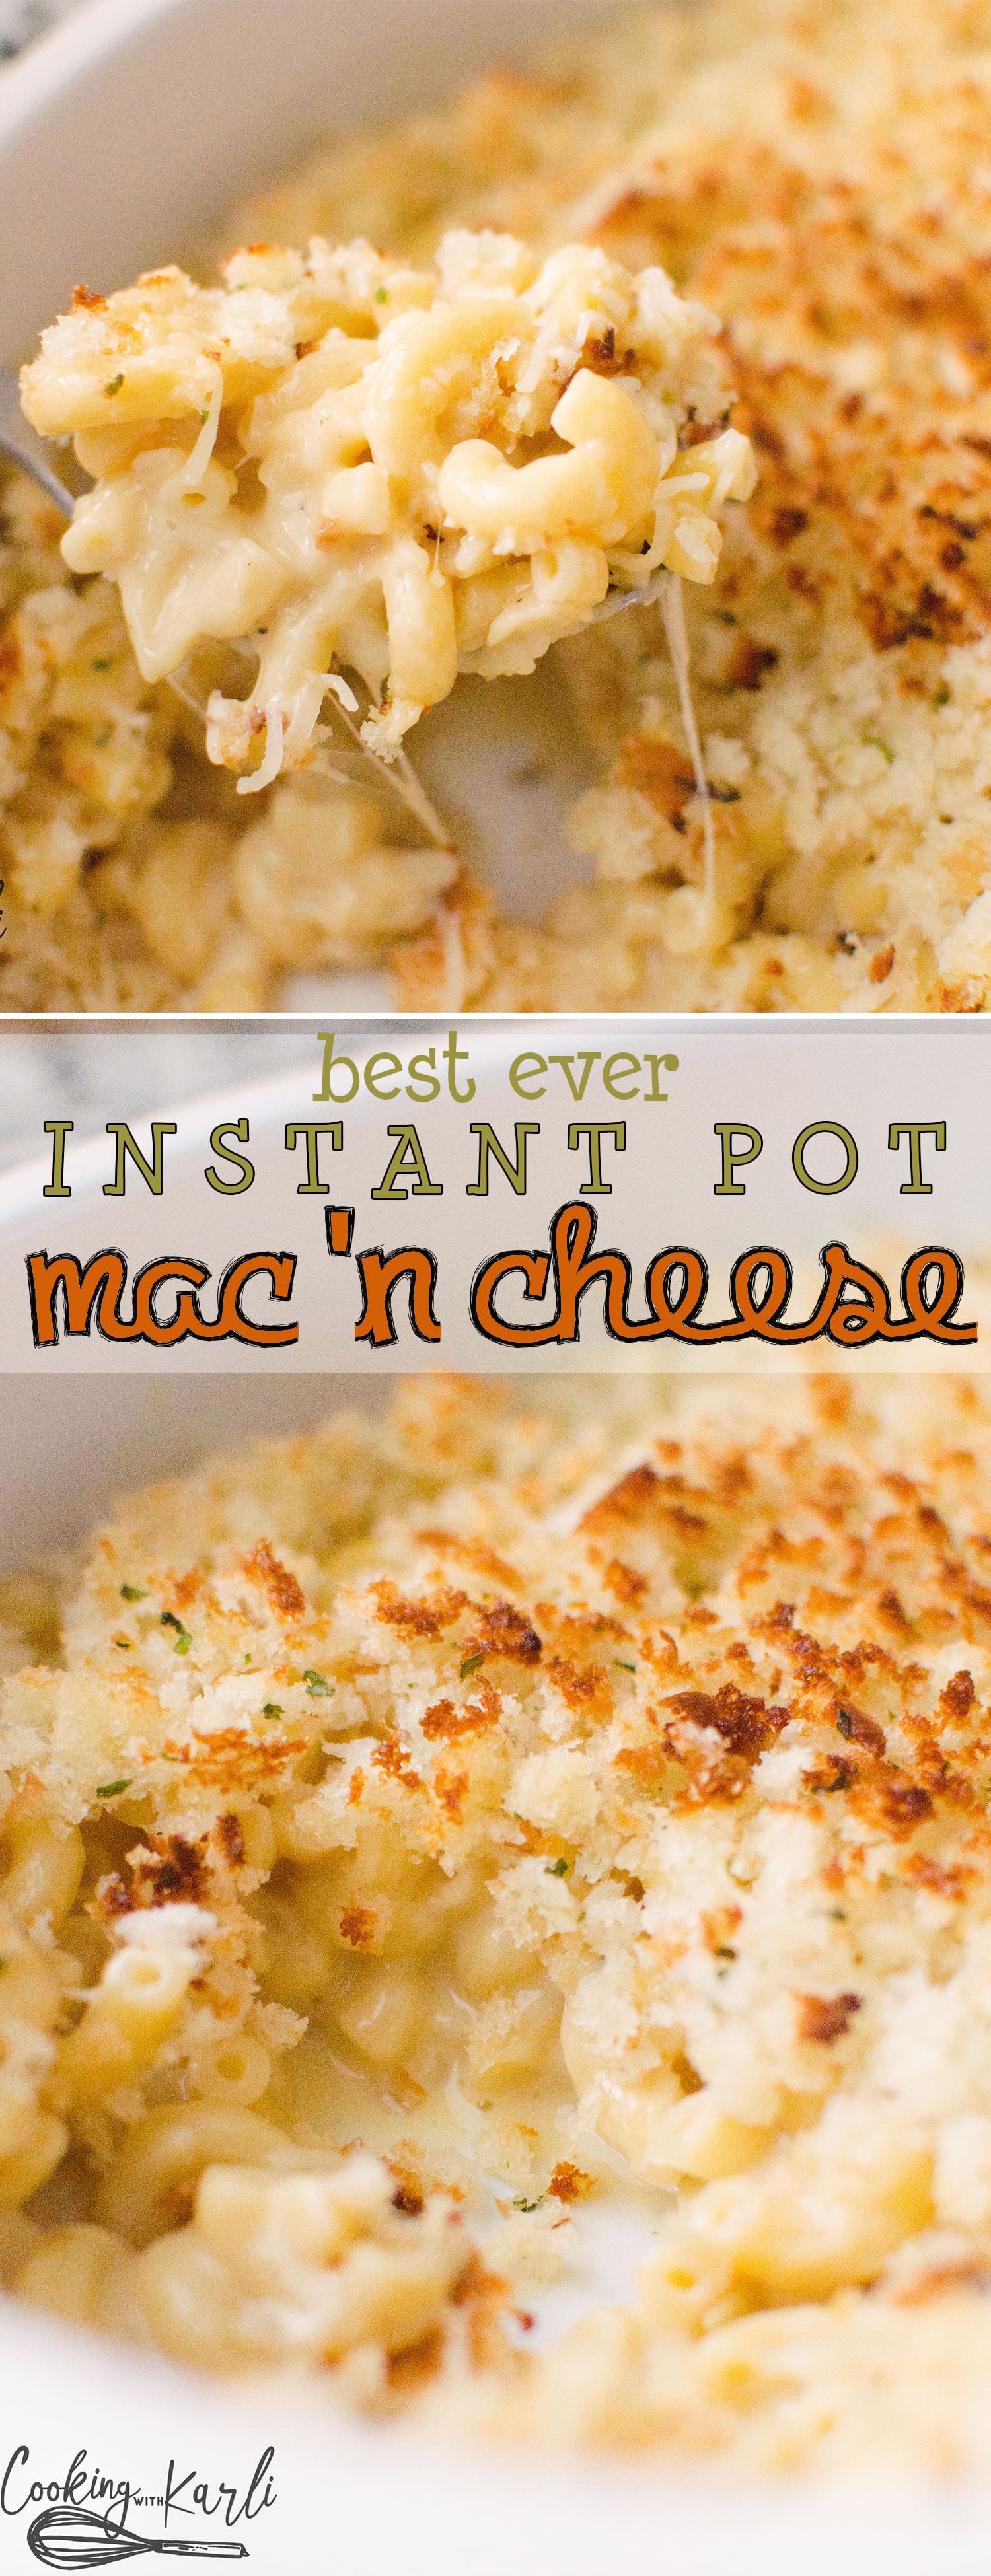 Instant Pot Mac 'n Cheese is equally fast and delicious! Perfectly cooked pasta, from scratch sauce and a crispy breadcrumb topping will knock your socks off! Perfect for ages 1-101!-Cooking with Karli- #instantpot #recip #dinner #maindish #side 